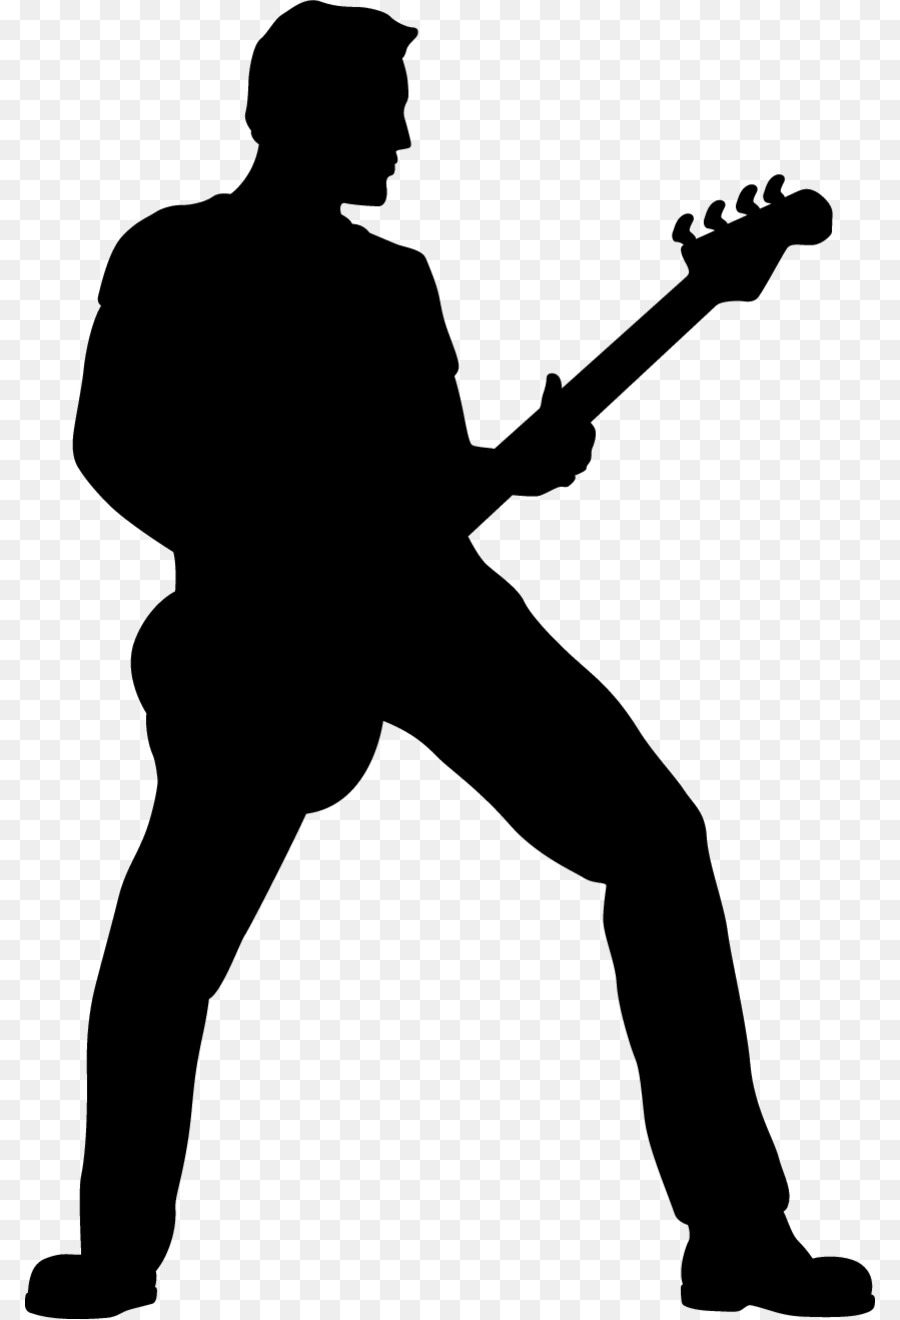 Guitarist Silhouette Clip art - band png download - 850*1319 - Free Transparent  png Download.